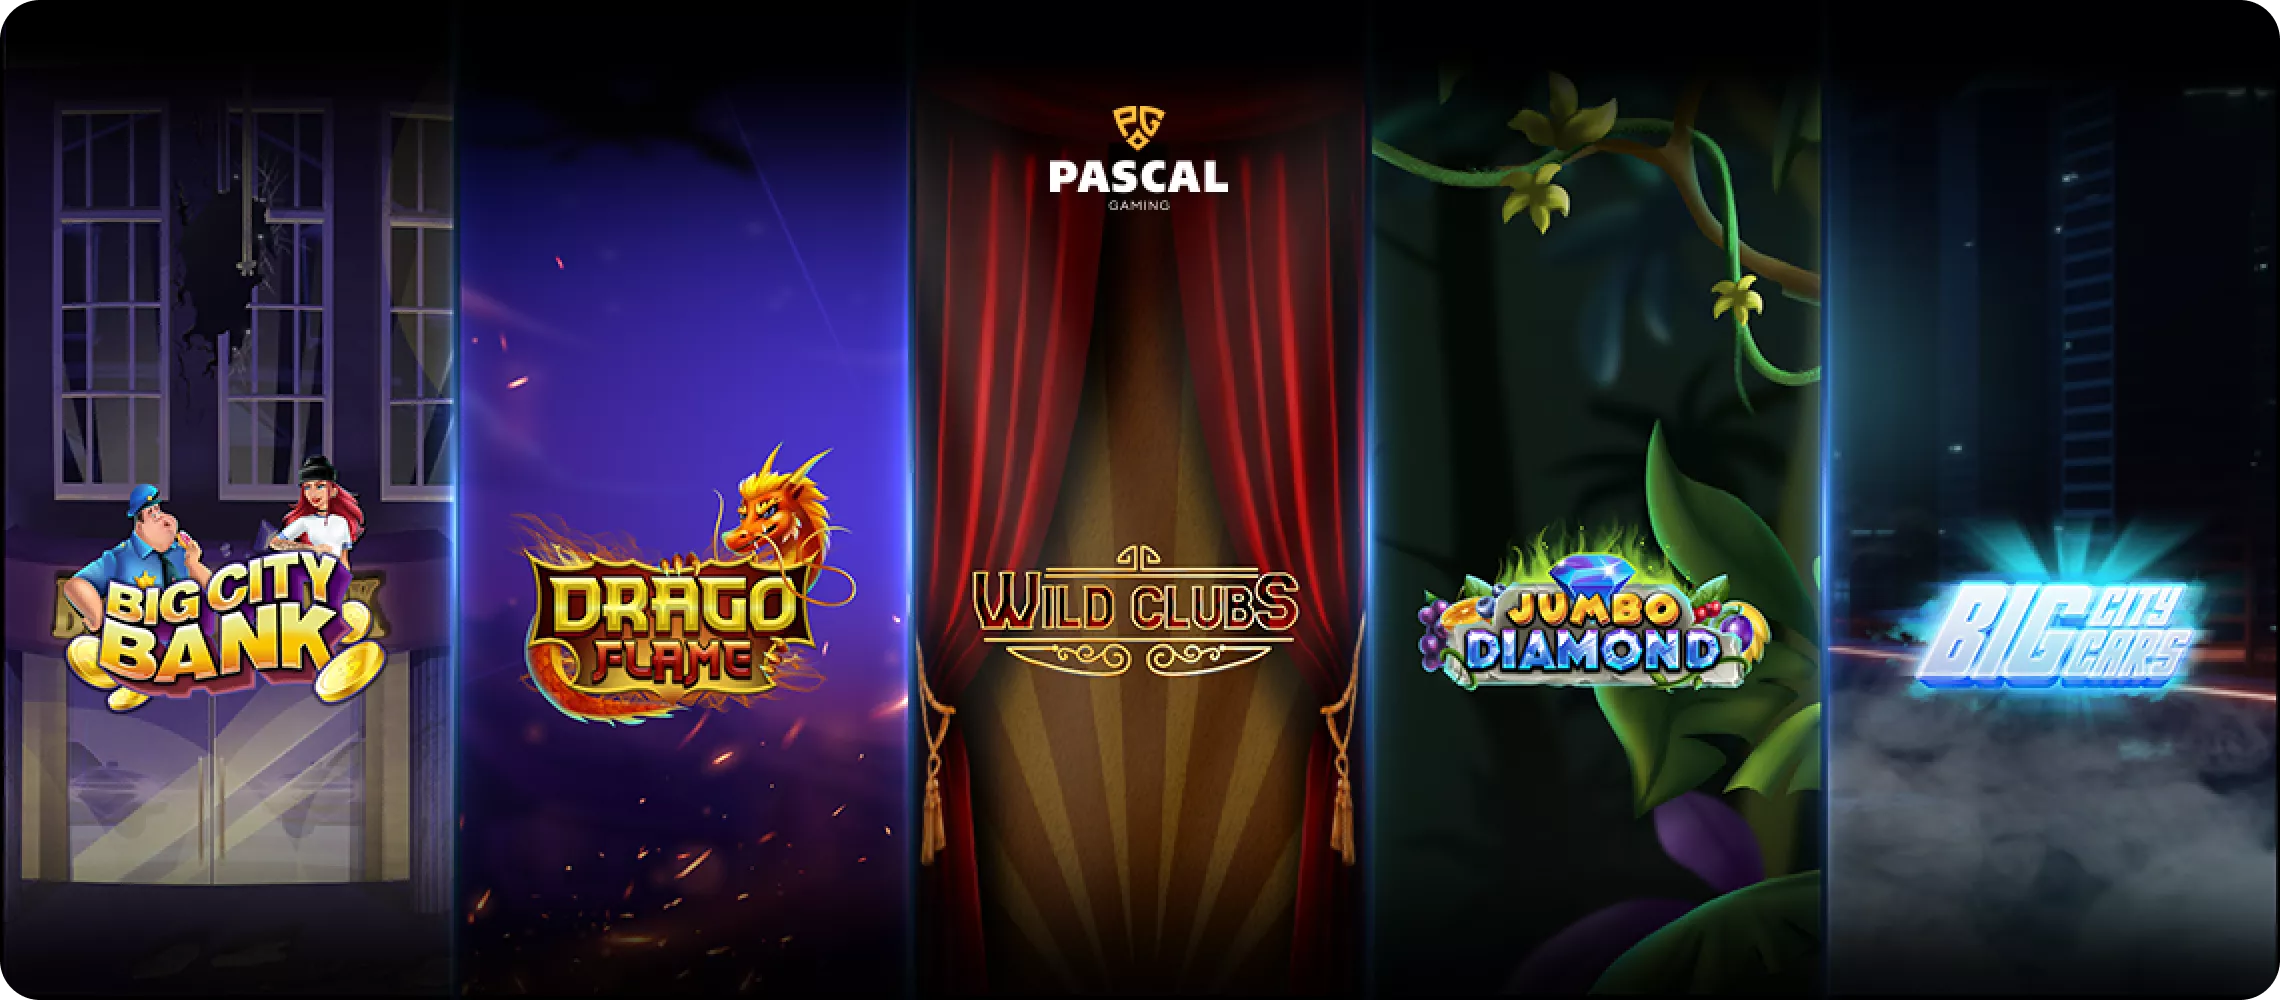 Pascal Gaming Introduces a New Line of Slots